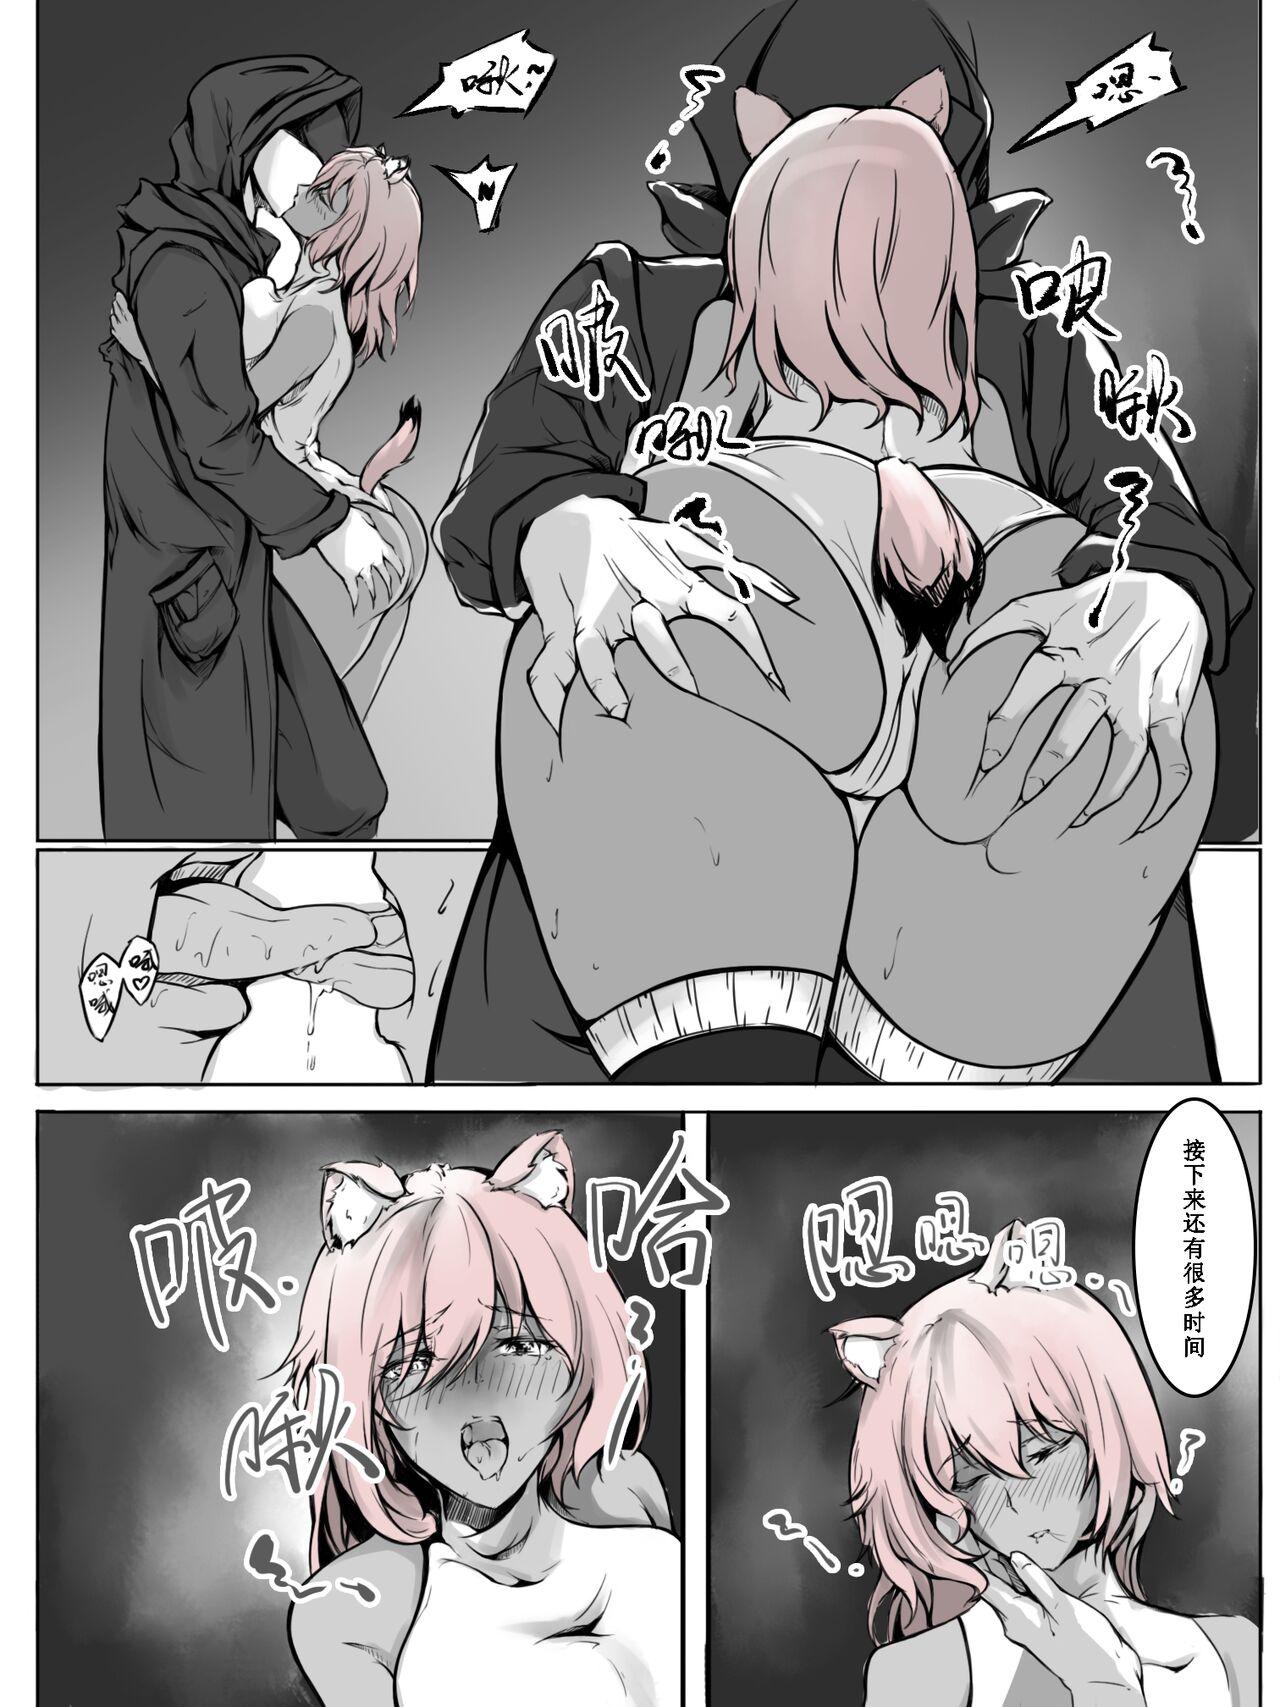 Granny Gravel R18 Doujinshi - Arknights Hot Wife - Page 10